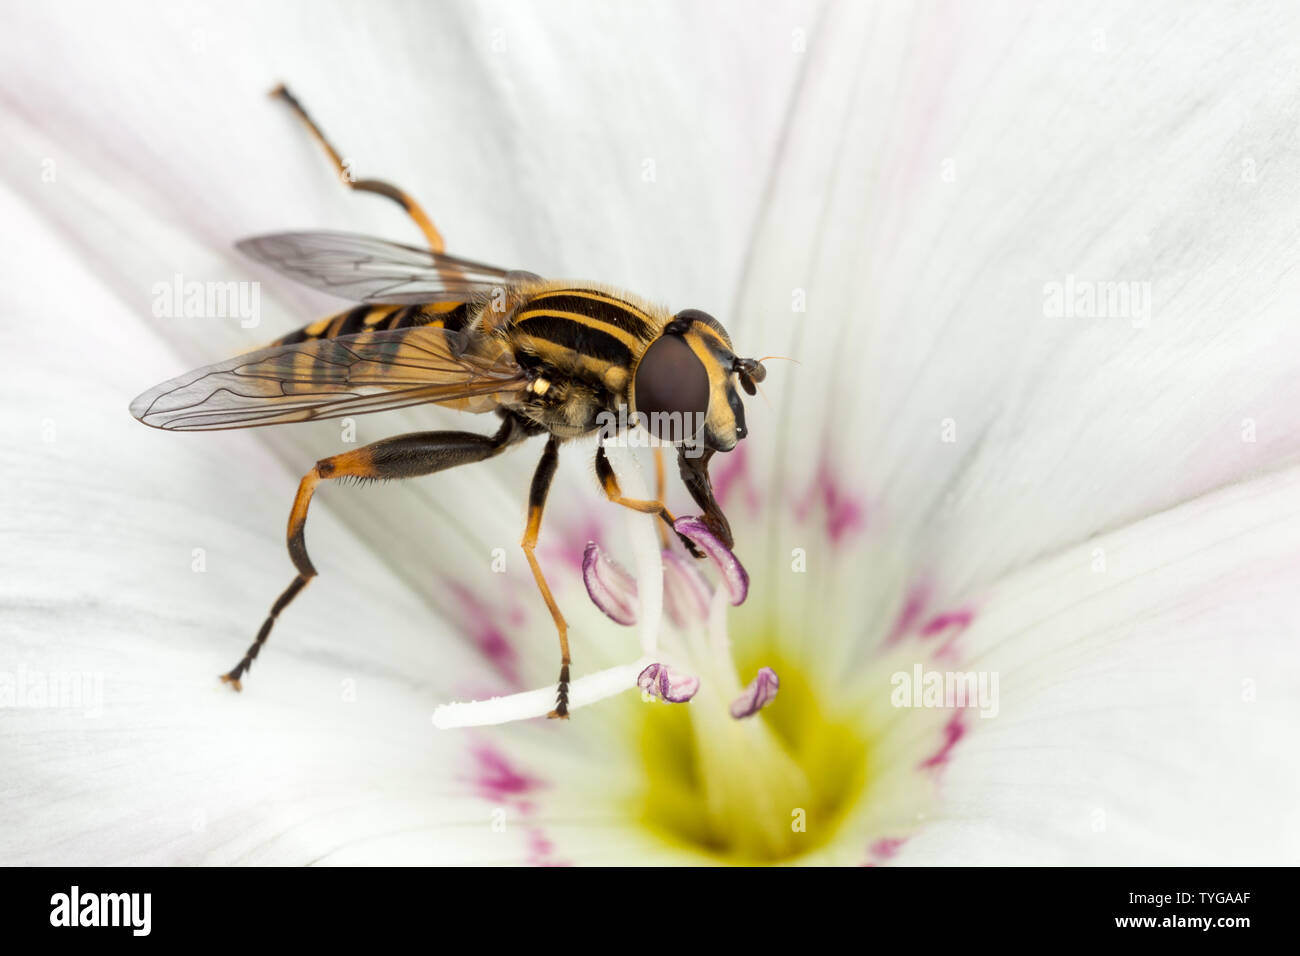 A hover fly feeds on nectar from inside a flower head. Stock Photo